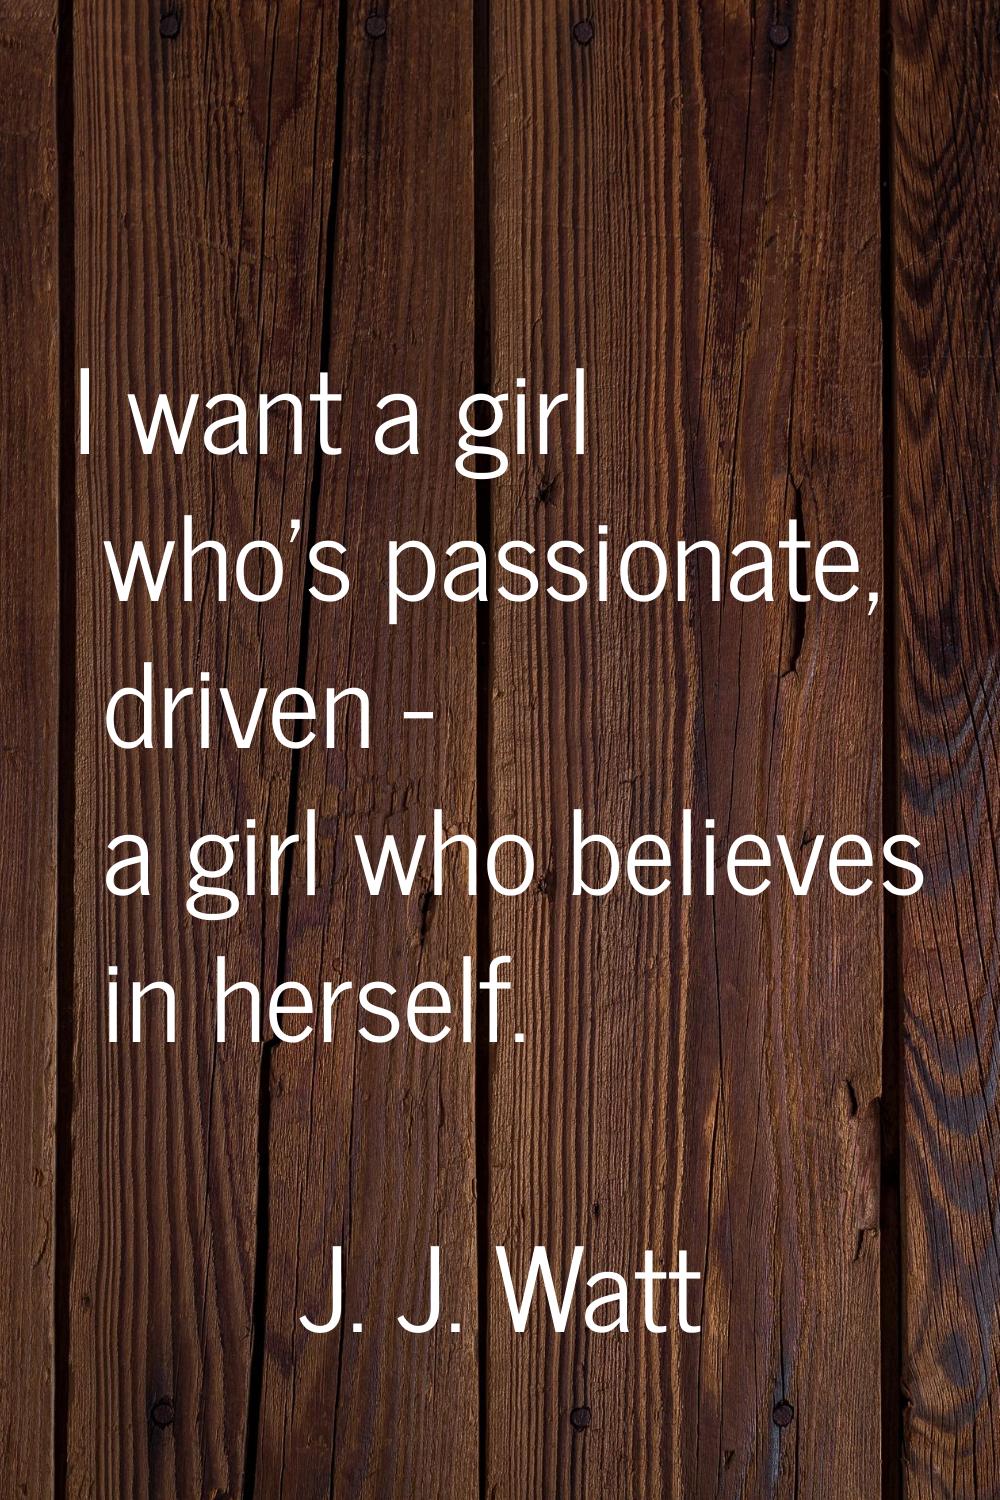 I want a girl who's passionate, driven - a girl who believes in herself.